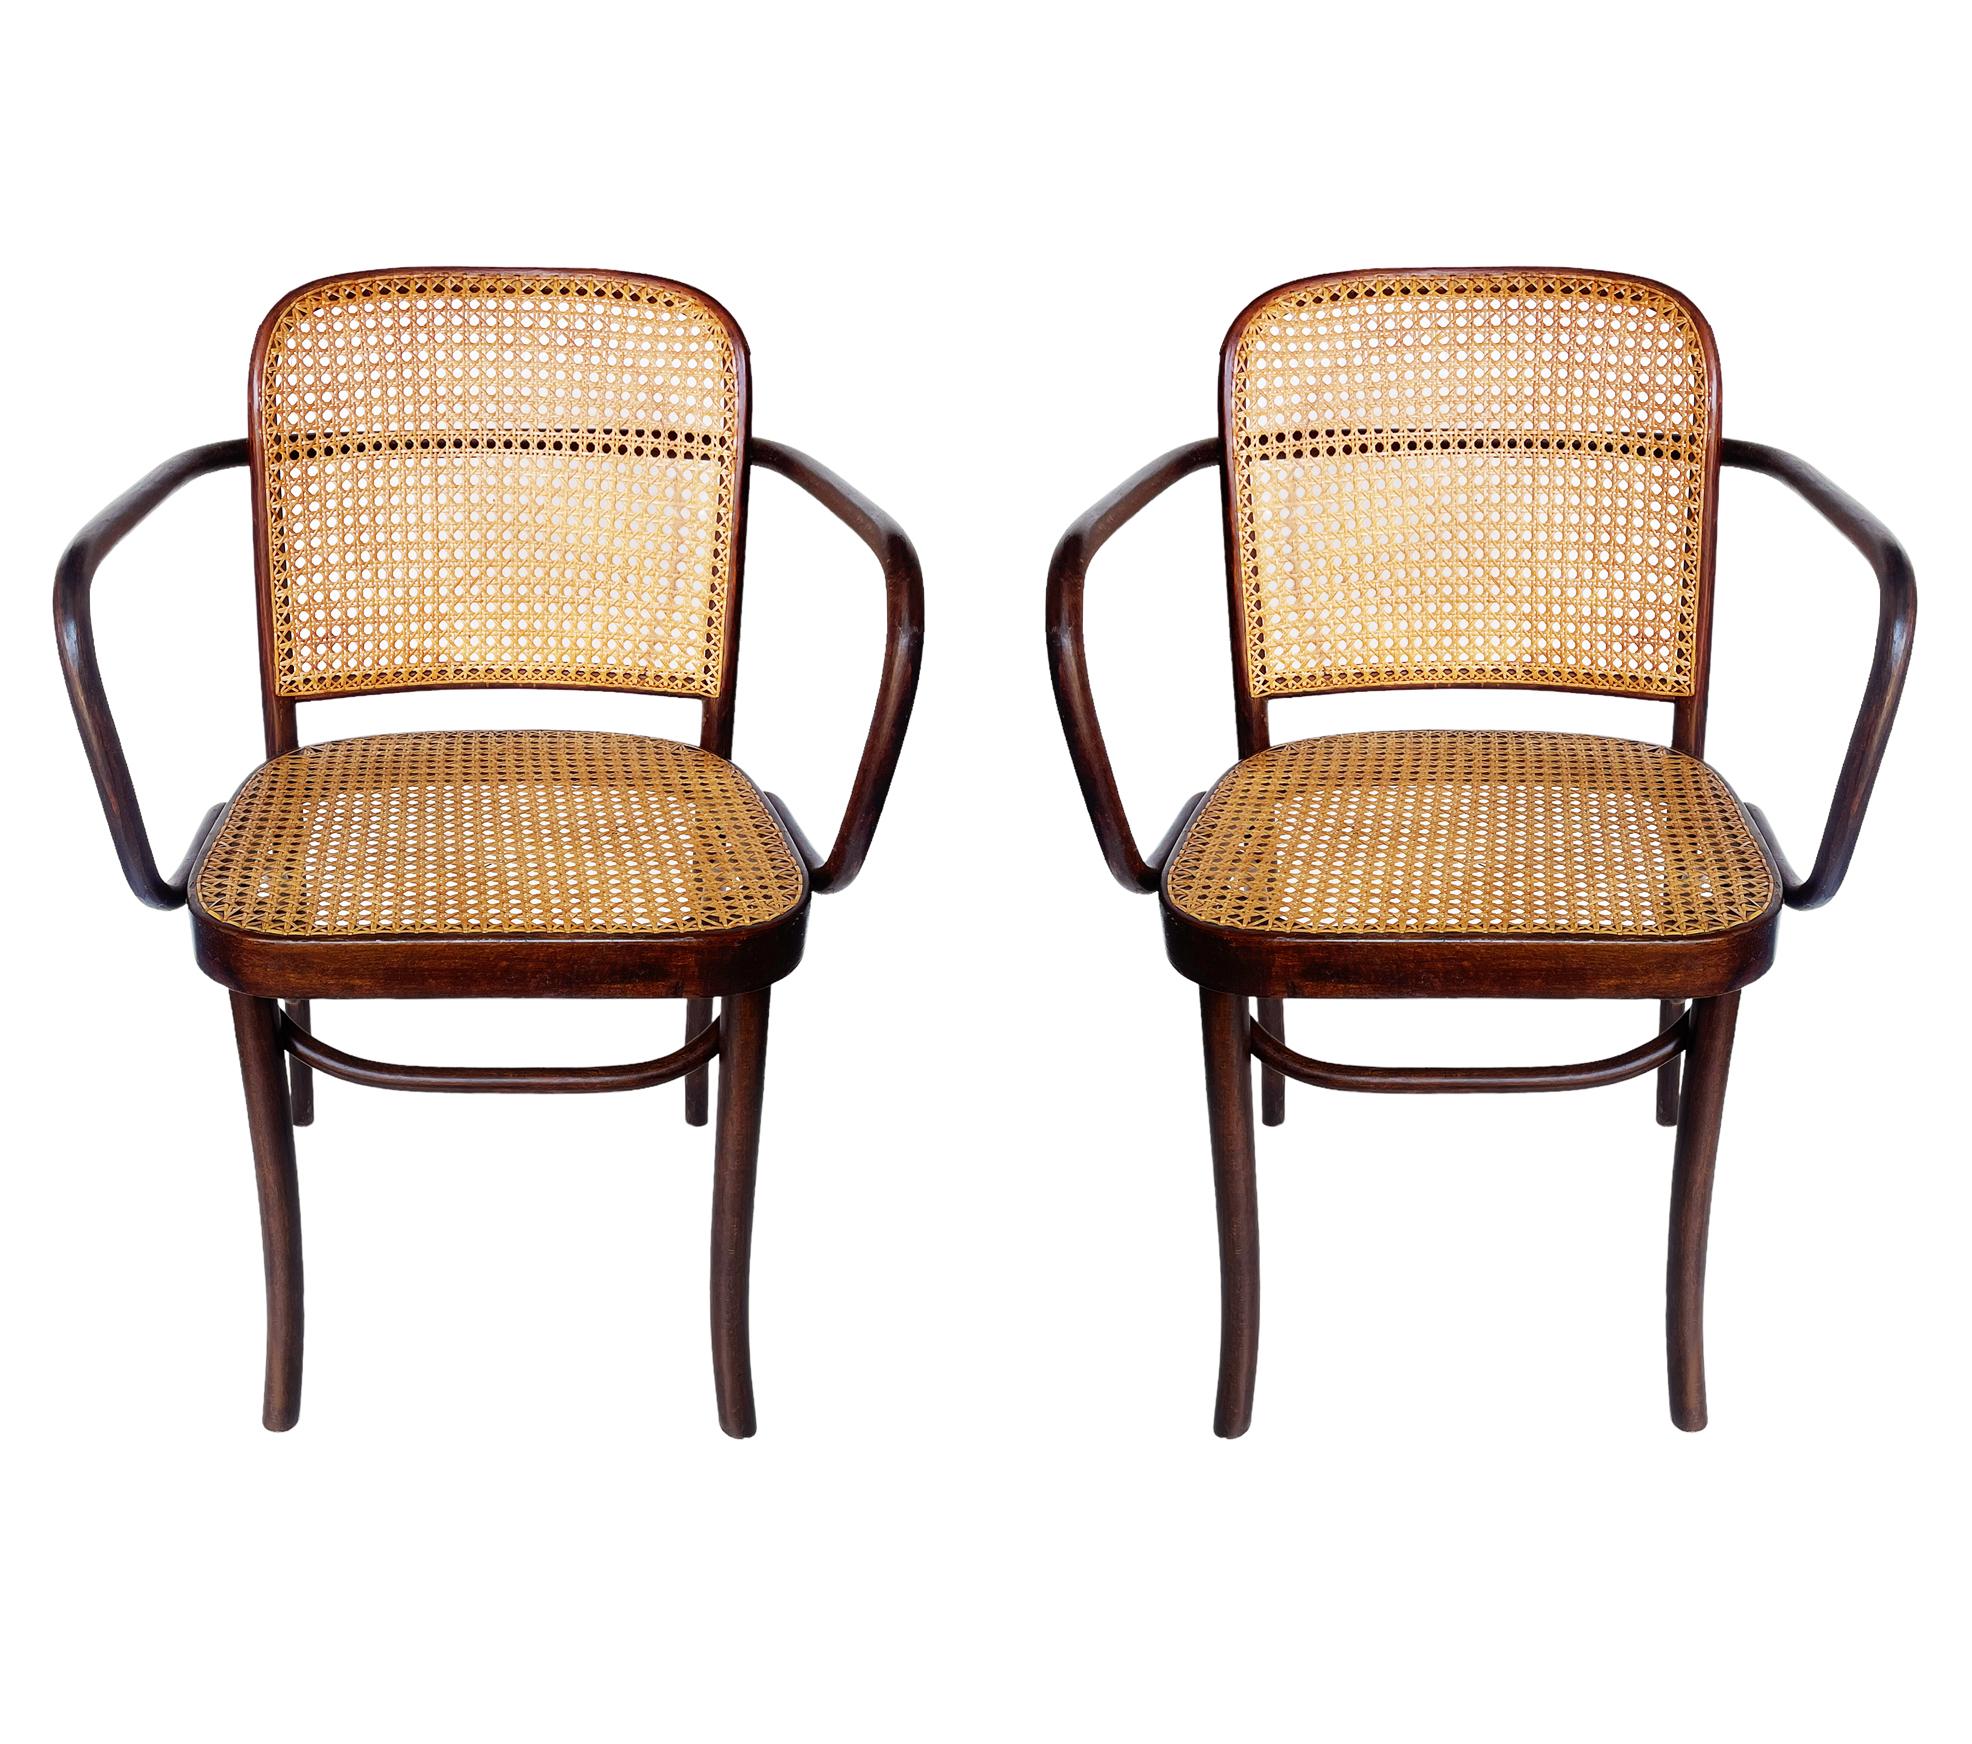 A complete set of four Josef Hoffmann bentwood Prague chairs in dark stained birch. The caning on these were most likely done at some point and looks great. Beautiful set of chairs and ready to use. Made in Czech, circa 1960s.